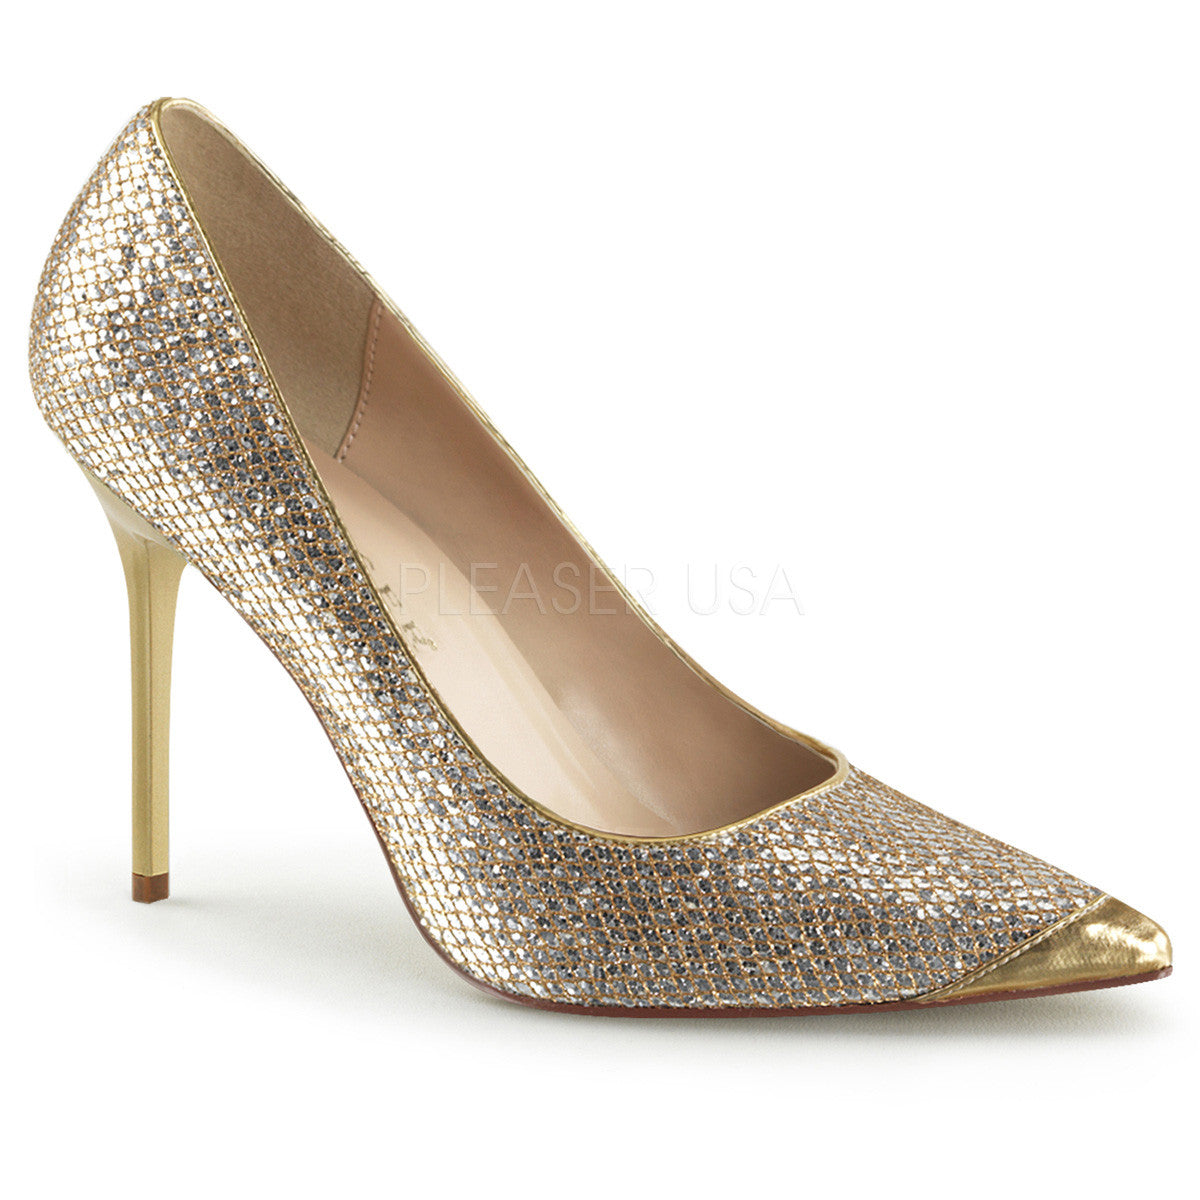 Pleaser CLASSIQUE-20 Gold Glittery Lame Fabric Pointed-Toe Pumps - Shoecup.com - 1